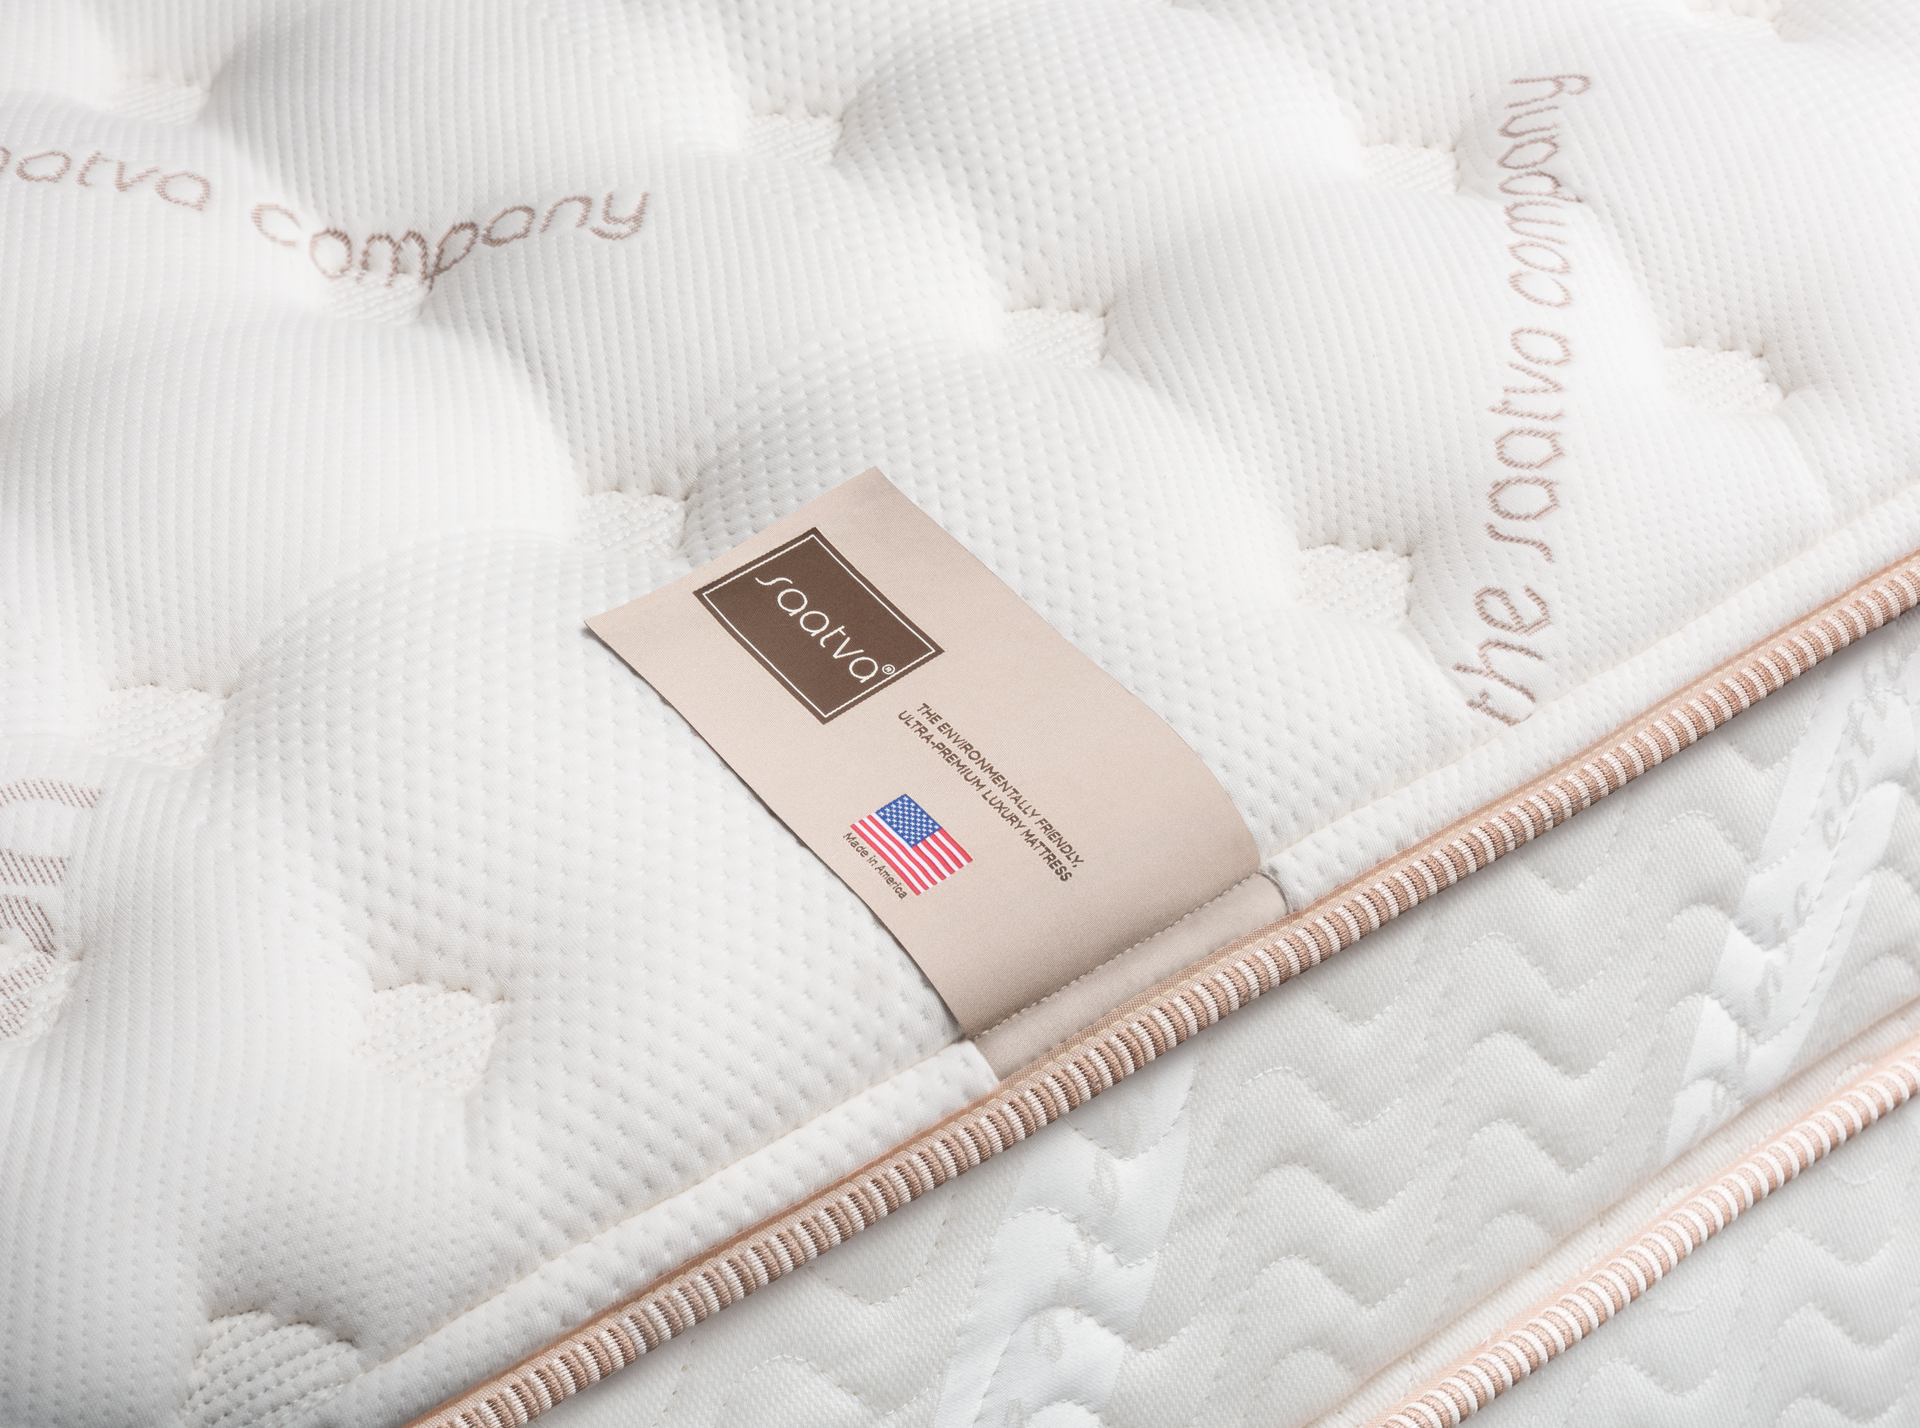 Close up of the Saatva label on one of its eco-friendly, handcrafted, American-made mattresses.